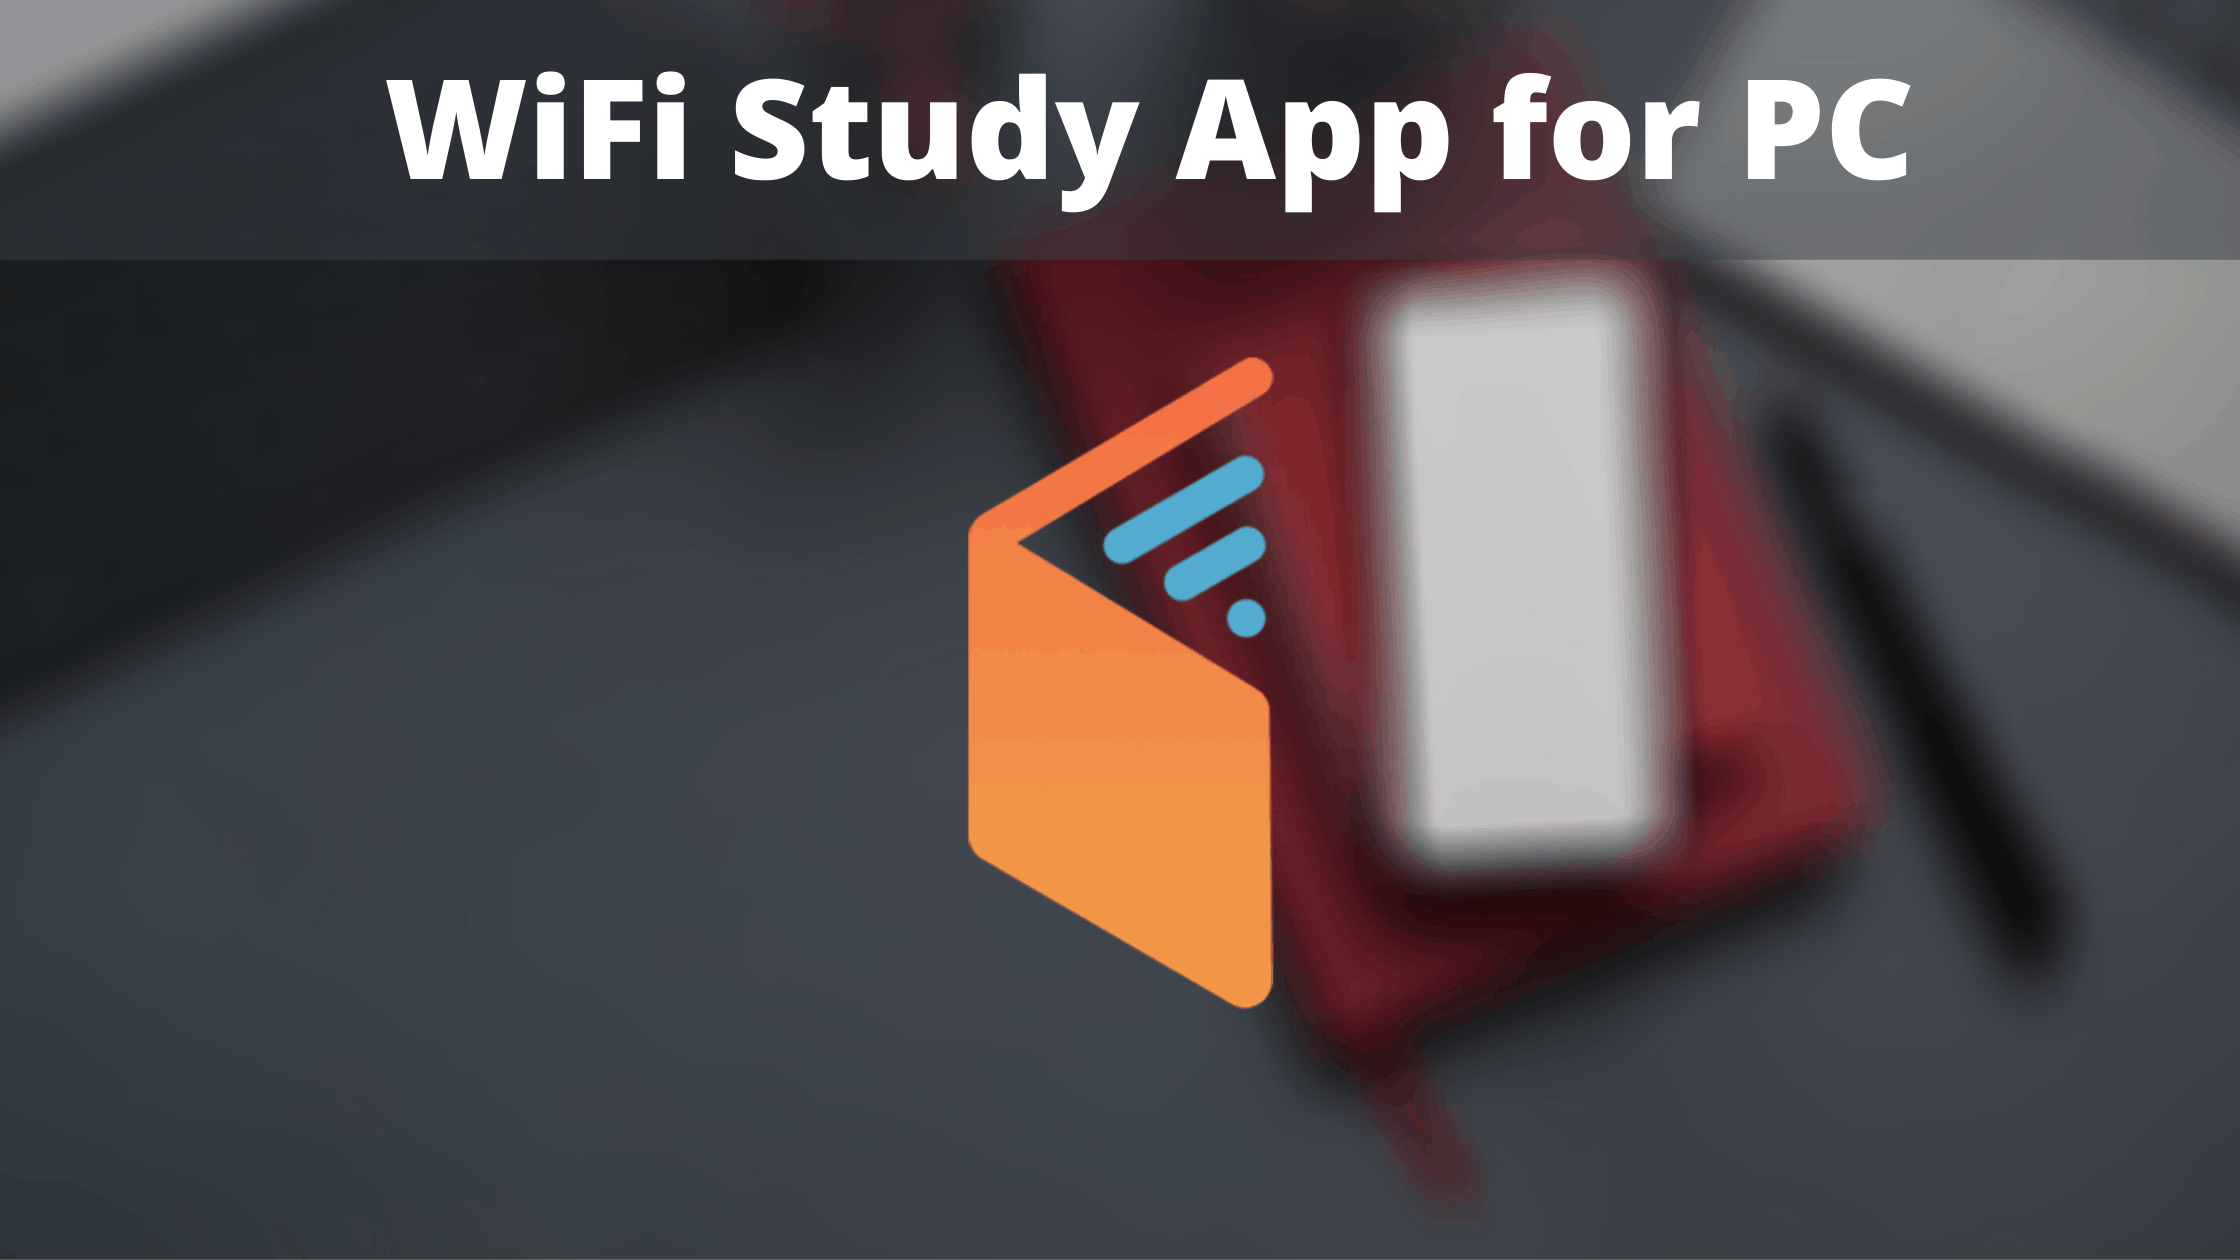 Download and install WiFi Study App for PC